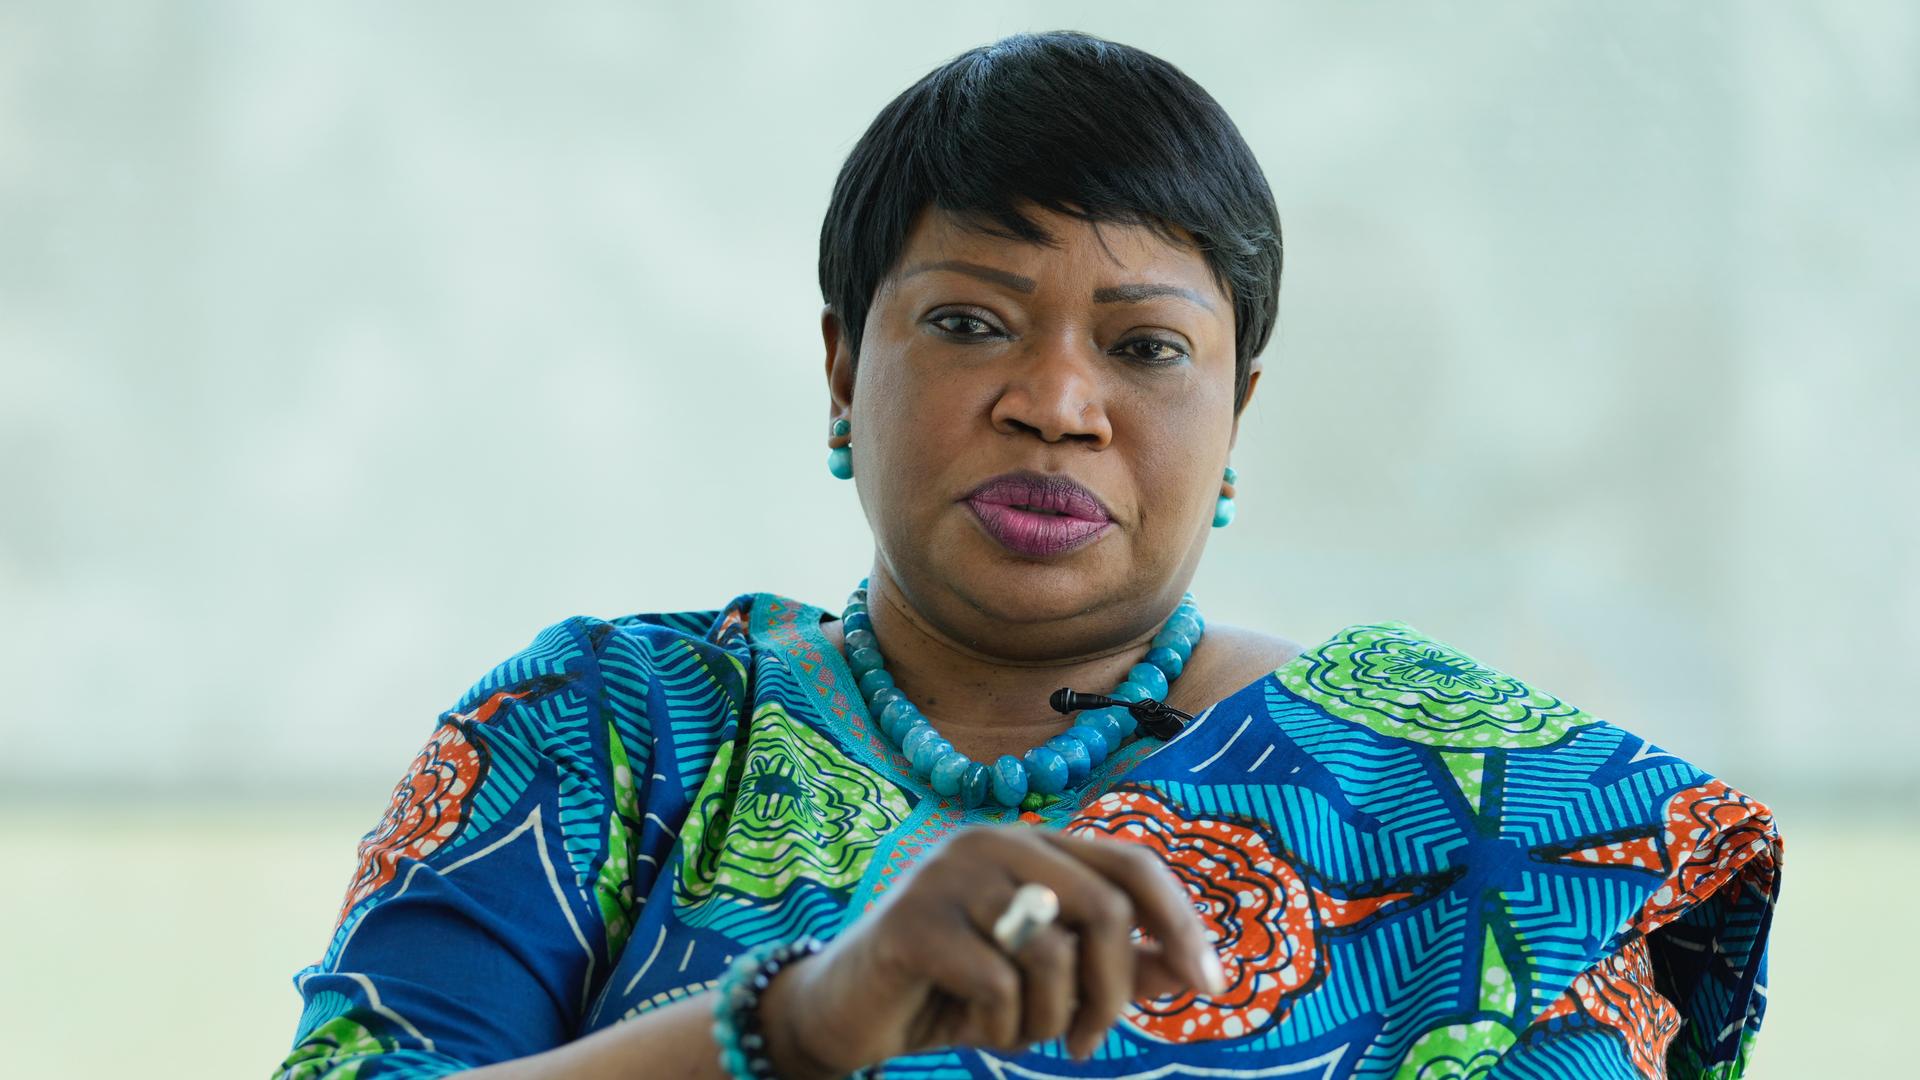 Photo of ICC Prosecutor Fatou Bensouda wearing a blue, green and orange outfit